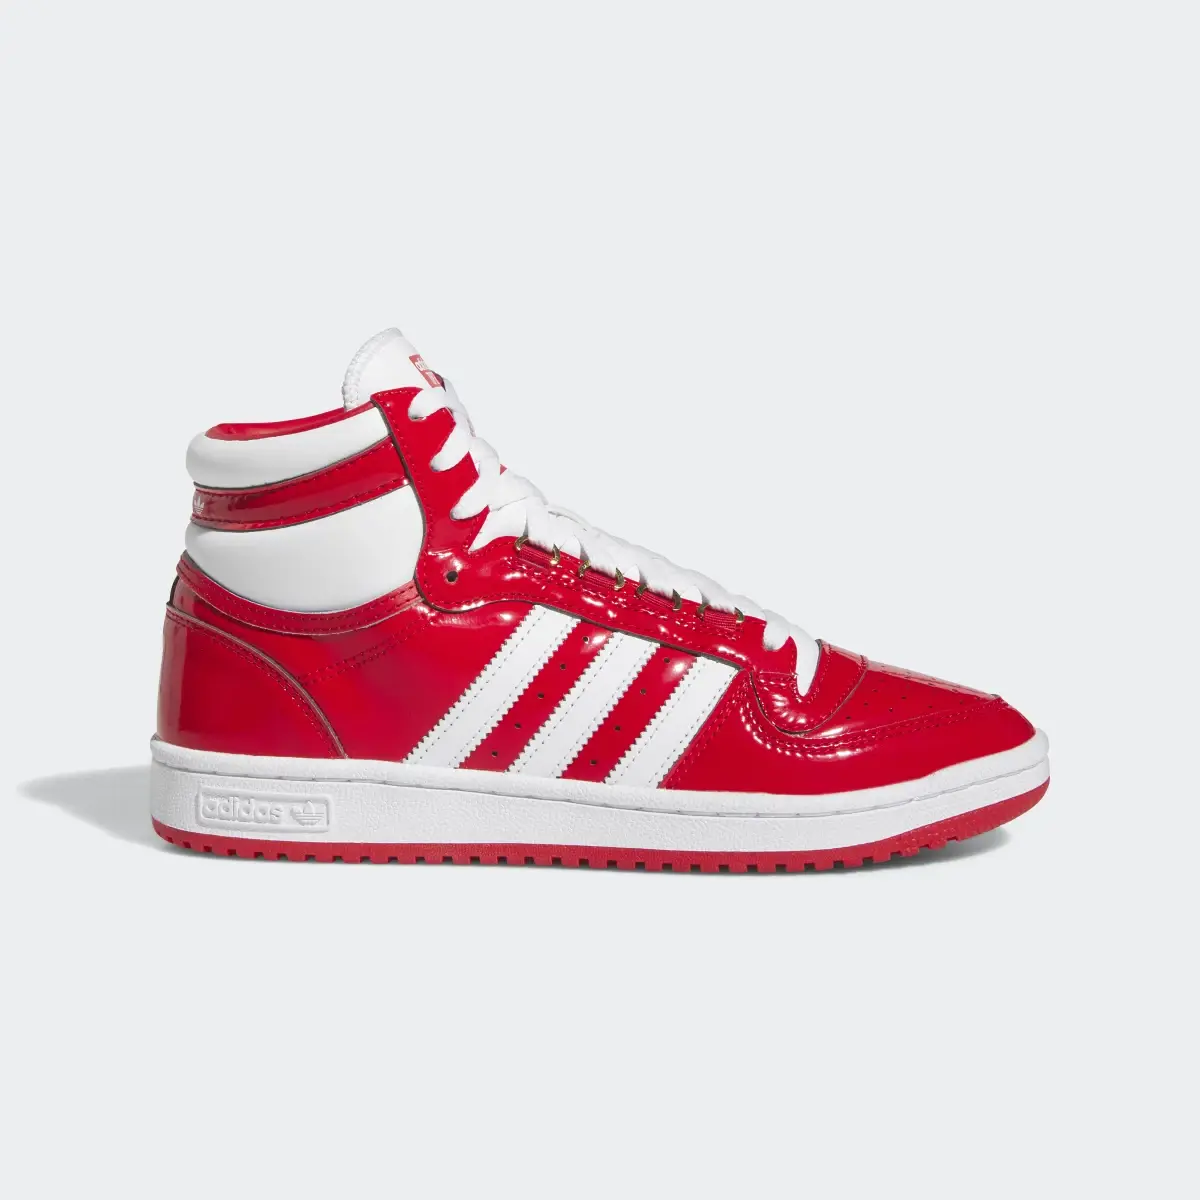 Adidas Top Ten RB Shoes. 2